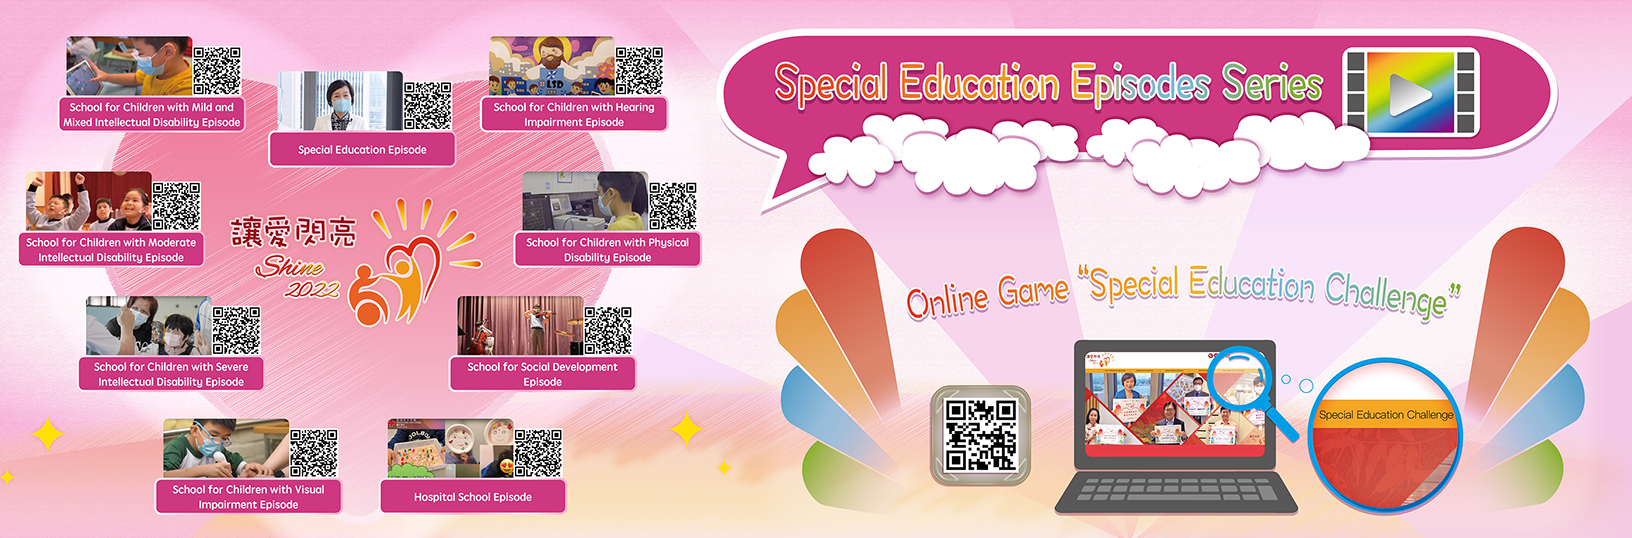 Special education episodes and online game